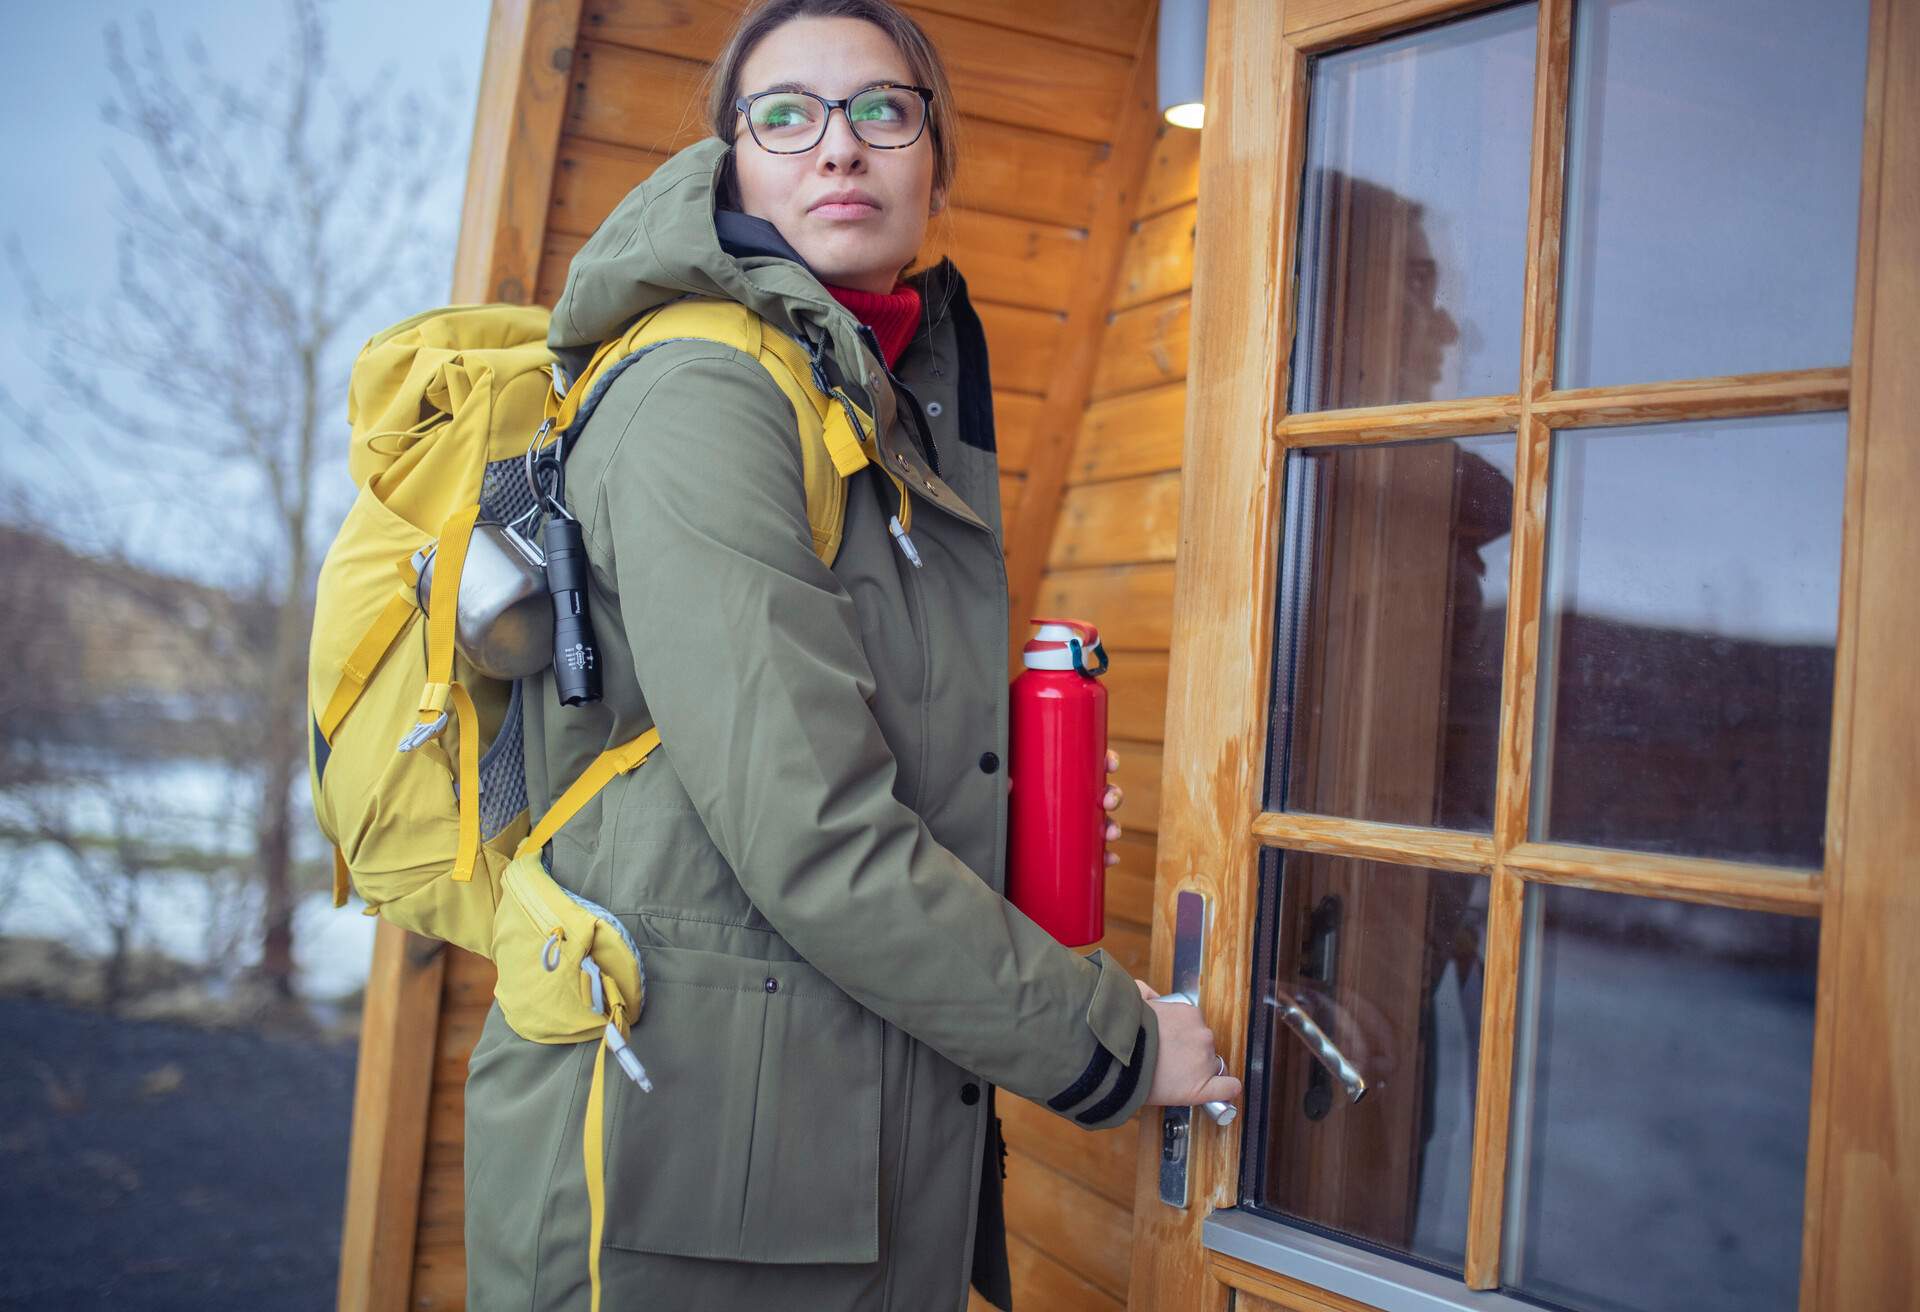 Woman holding a thermal flask about to open the door to get inside the wooden cabin.